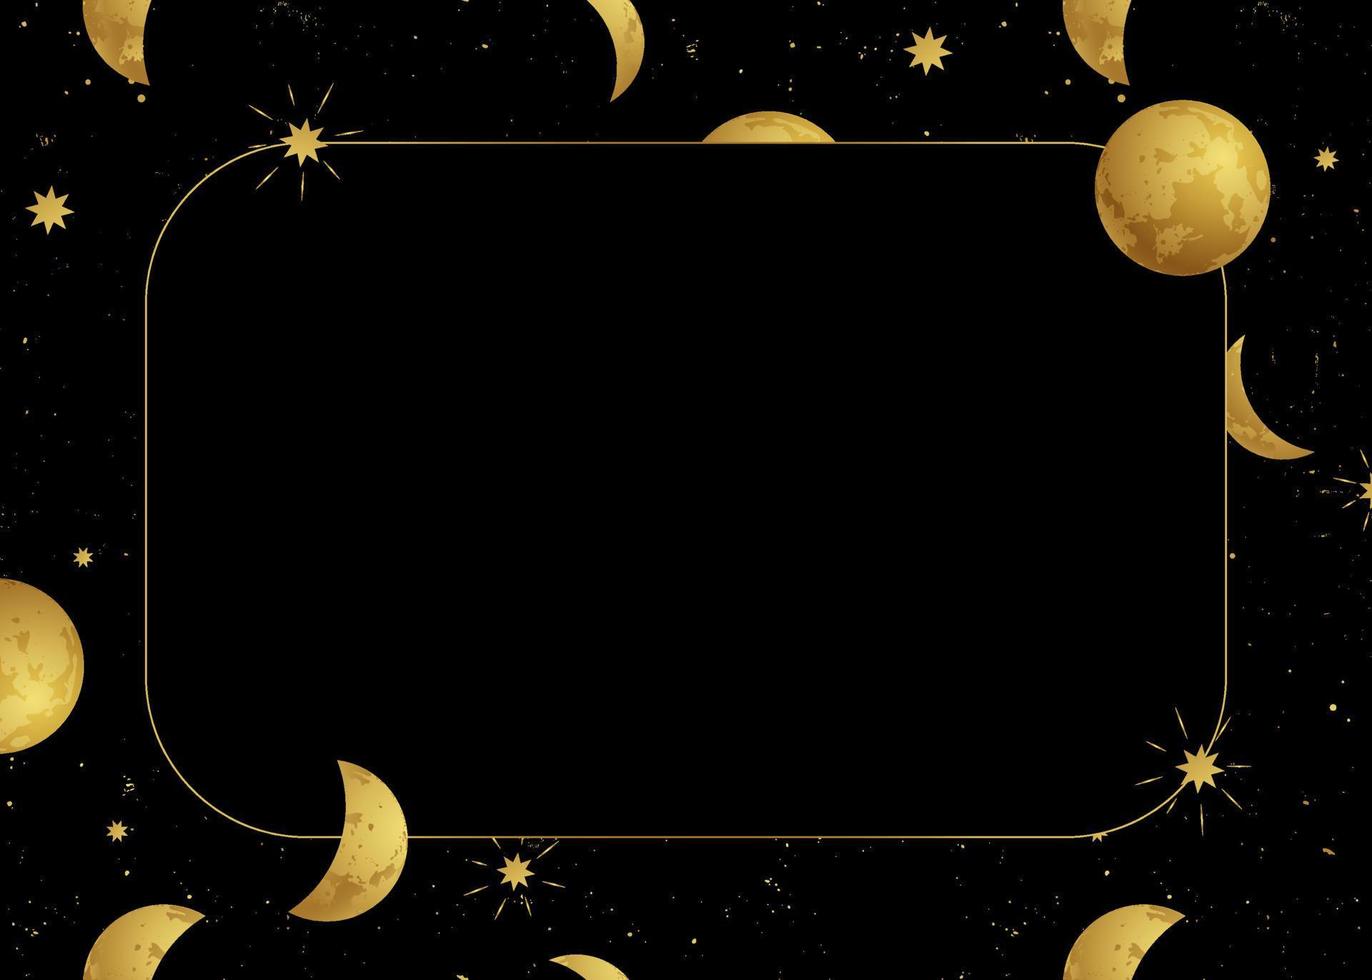 Golden space backdrop with stars and moon phases on a black background with frame for tarot, astrology, wallpaper, case for phone. Magic cosmic sky, abstract esoteric ornament. Vector illustration. Vector Art